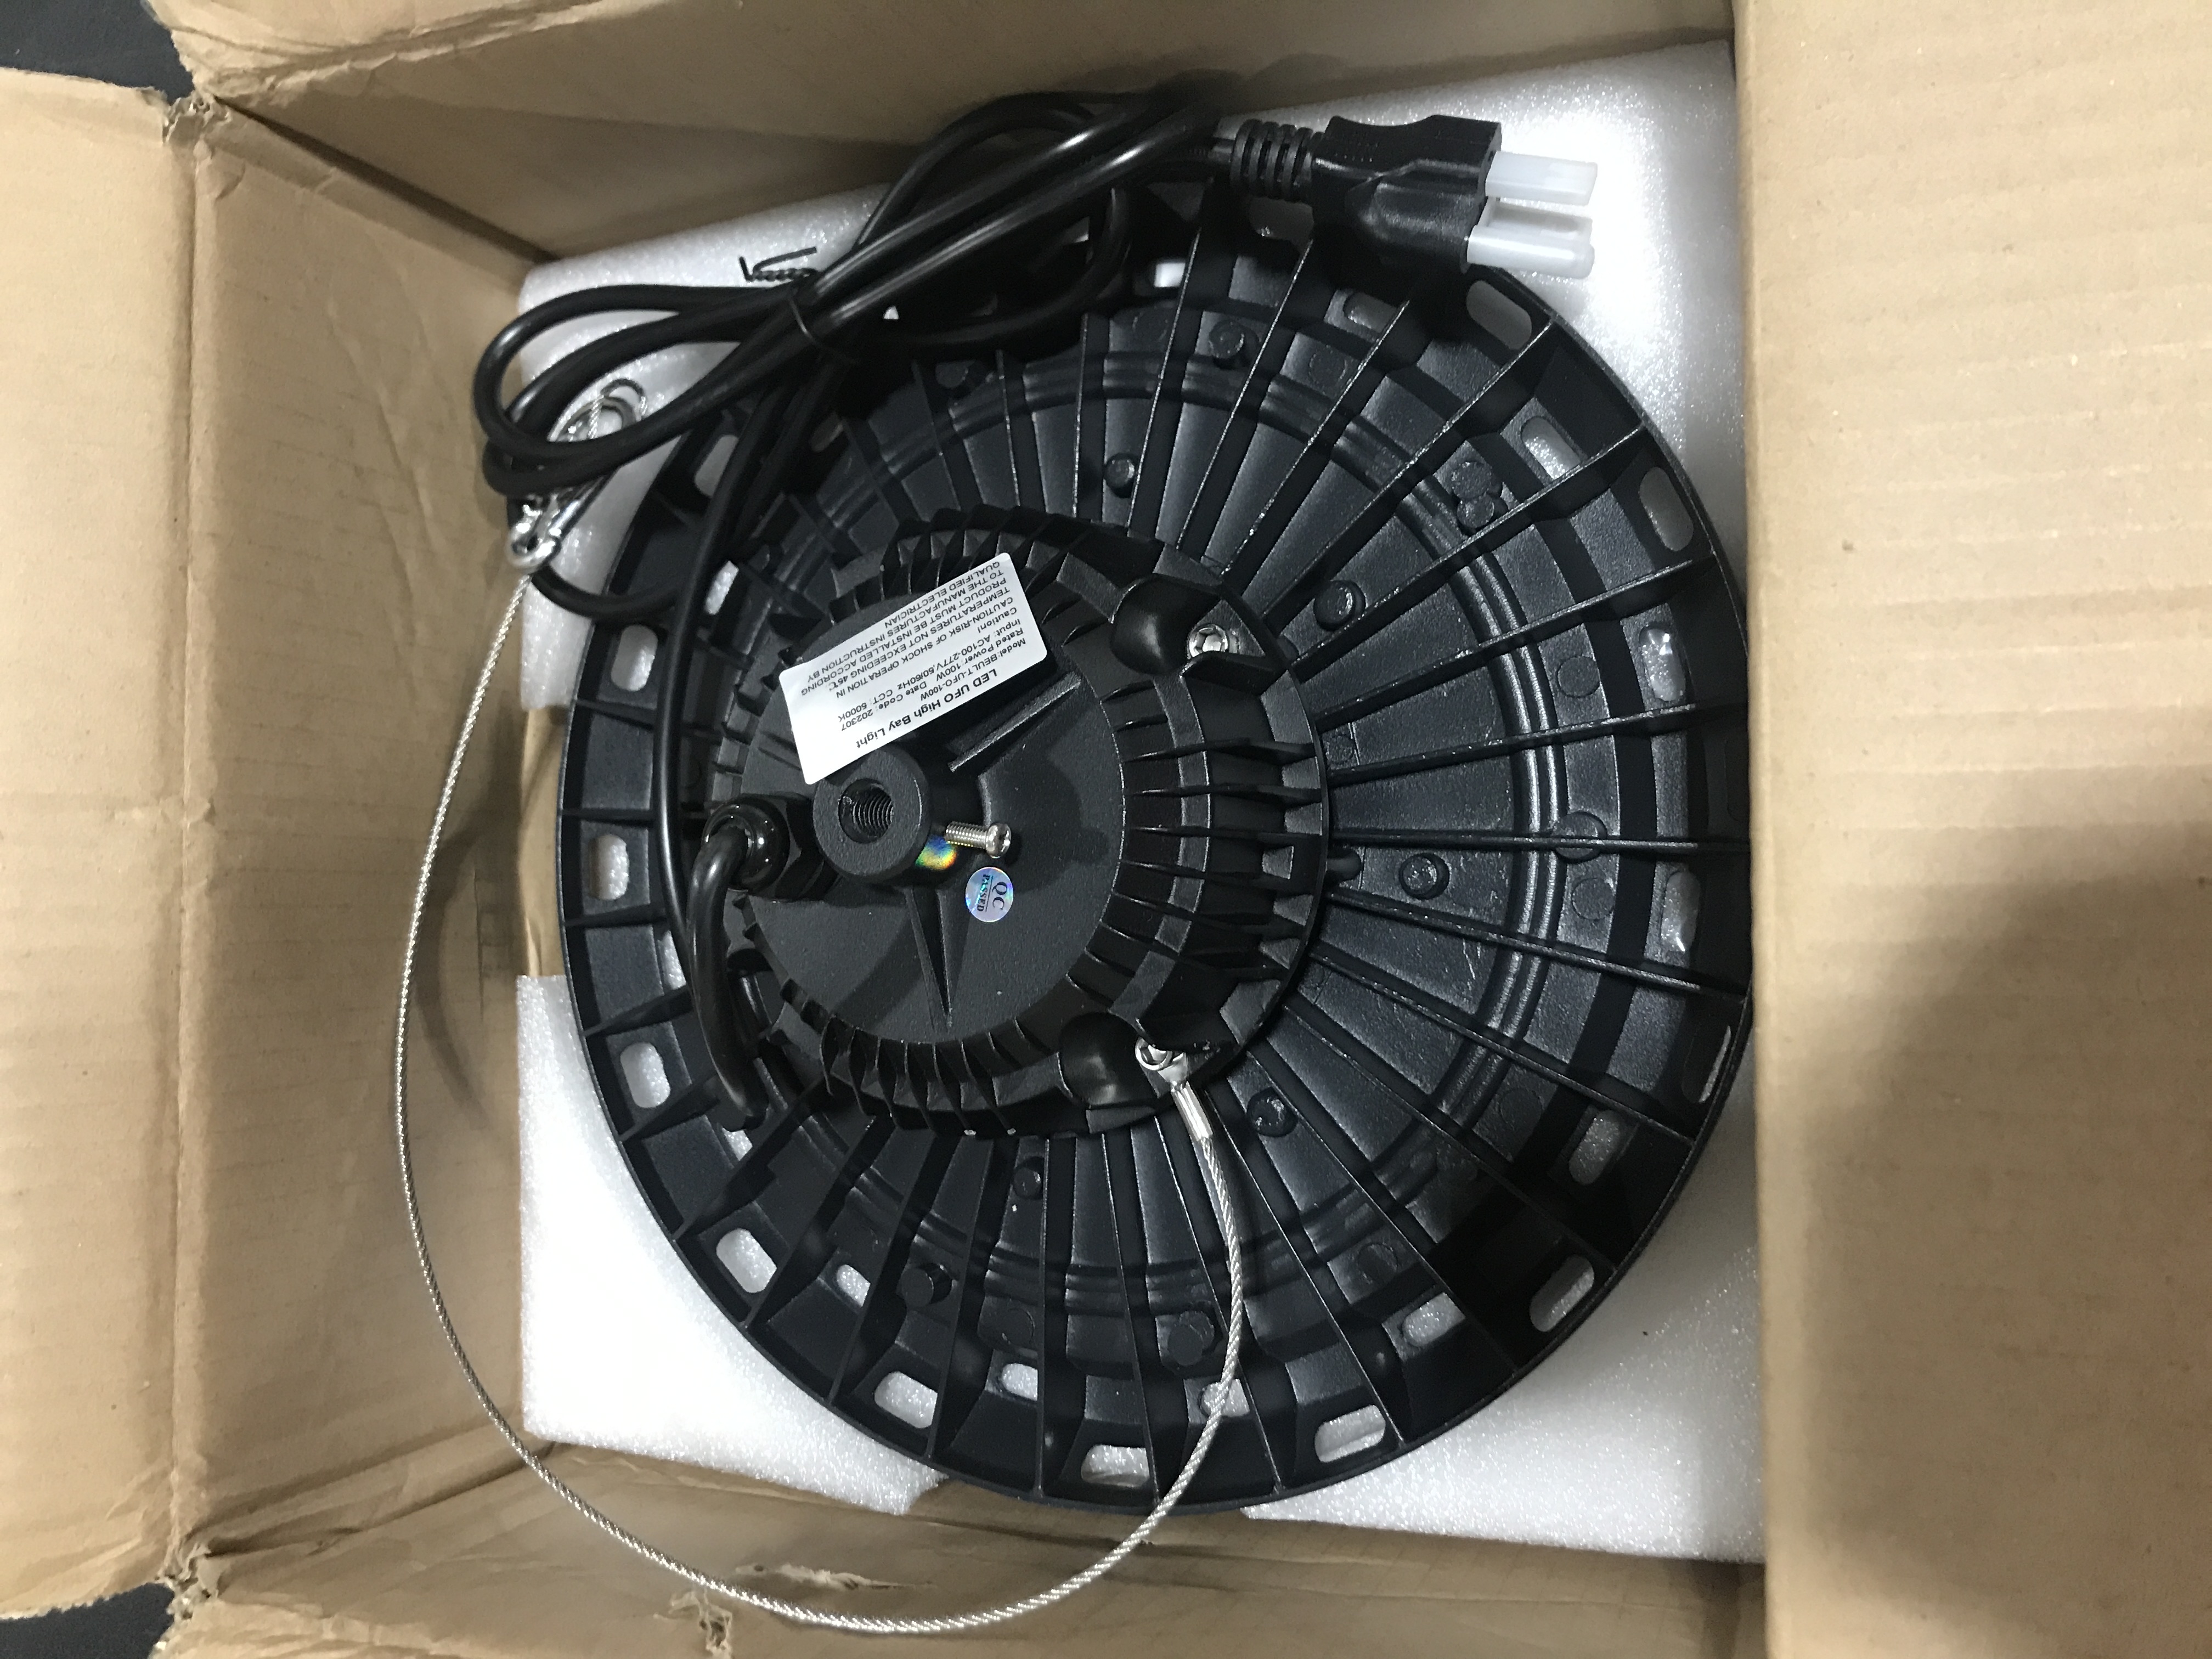 Photo 3 of 100W UFO LED High Bay Light 15000lm 5000K IP65 UL Approved 6' Cable with US Plug Alternative to 400W MH/HPS widely Used for Warehouse Shop Workshop Industrial Factory 100w-Non Dimmable